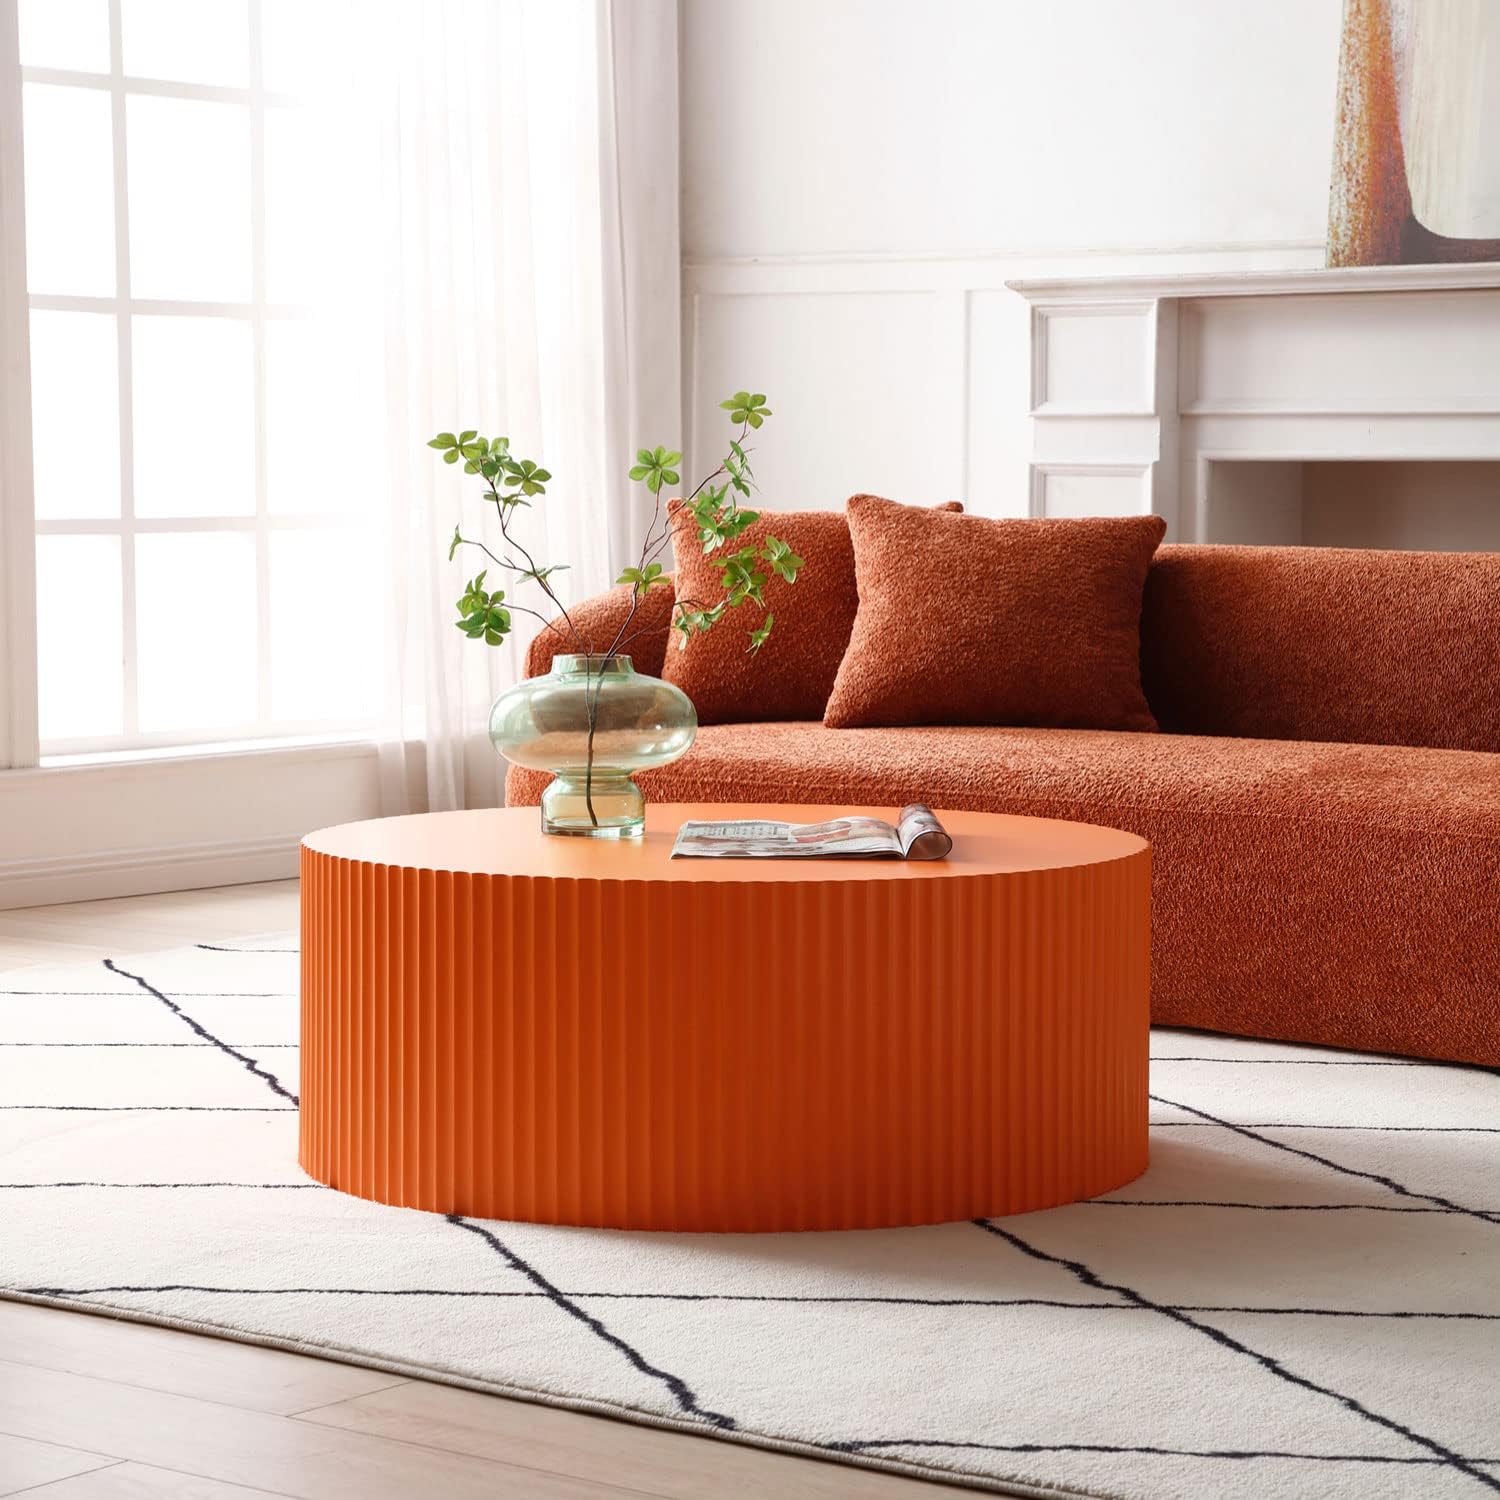 WILLIAMSPACE 35.43 Round Coffee Table, Matte Orange Wooden Coffee Table for Living Room, Modern Luxury Side Tables Accent End Table for for Home Office, 35.43 * 13.78H (Orange-Round)